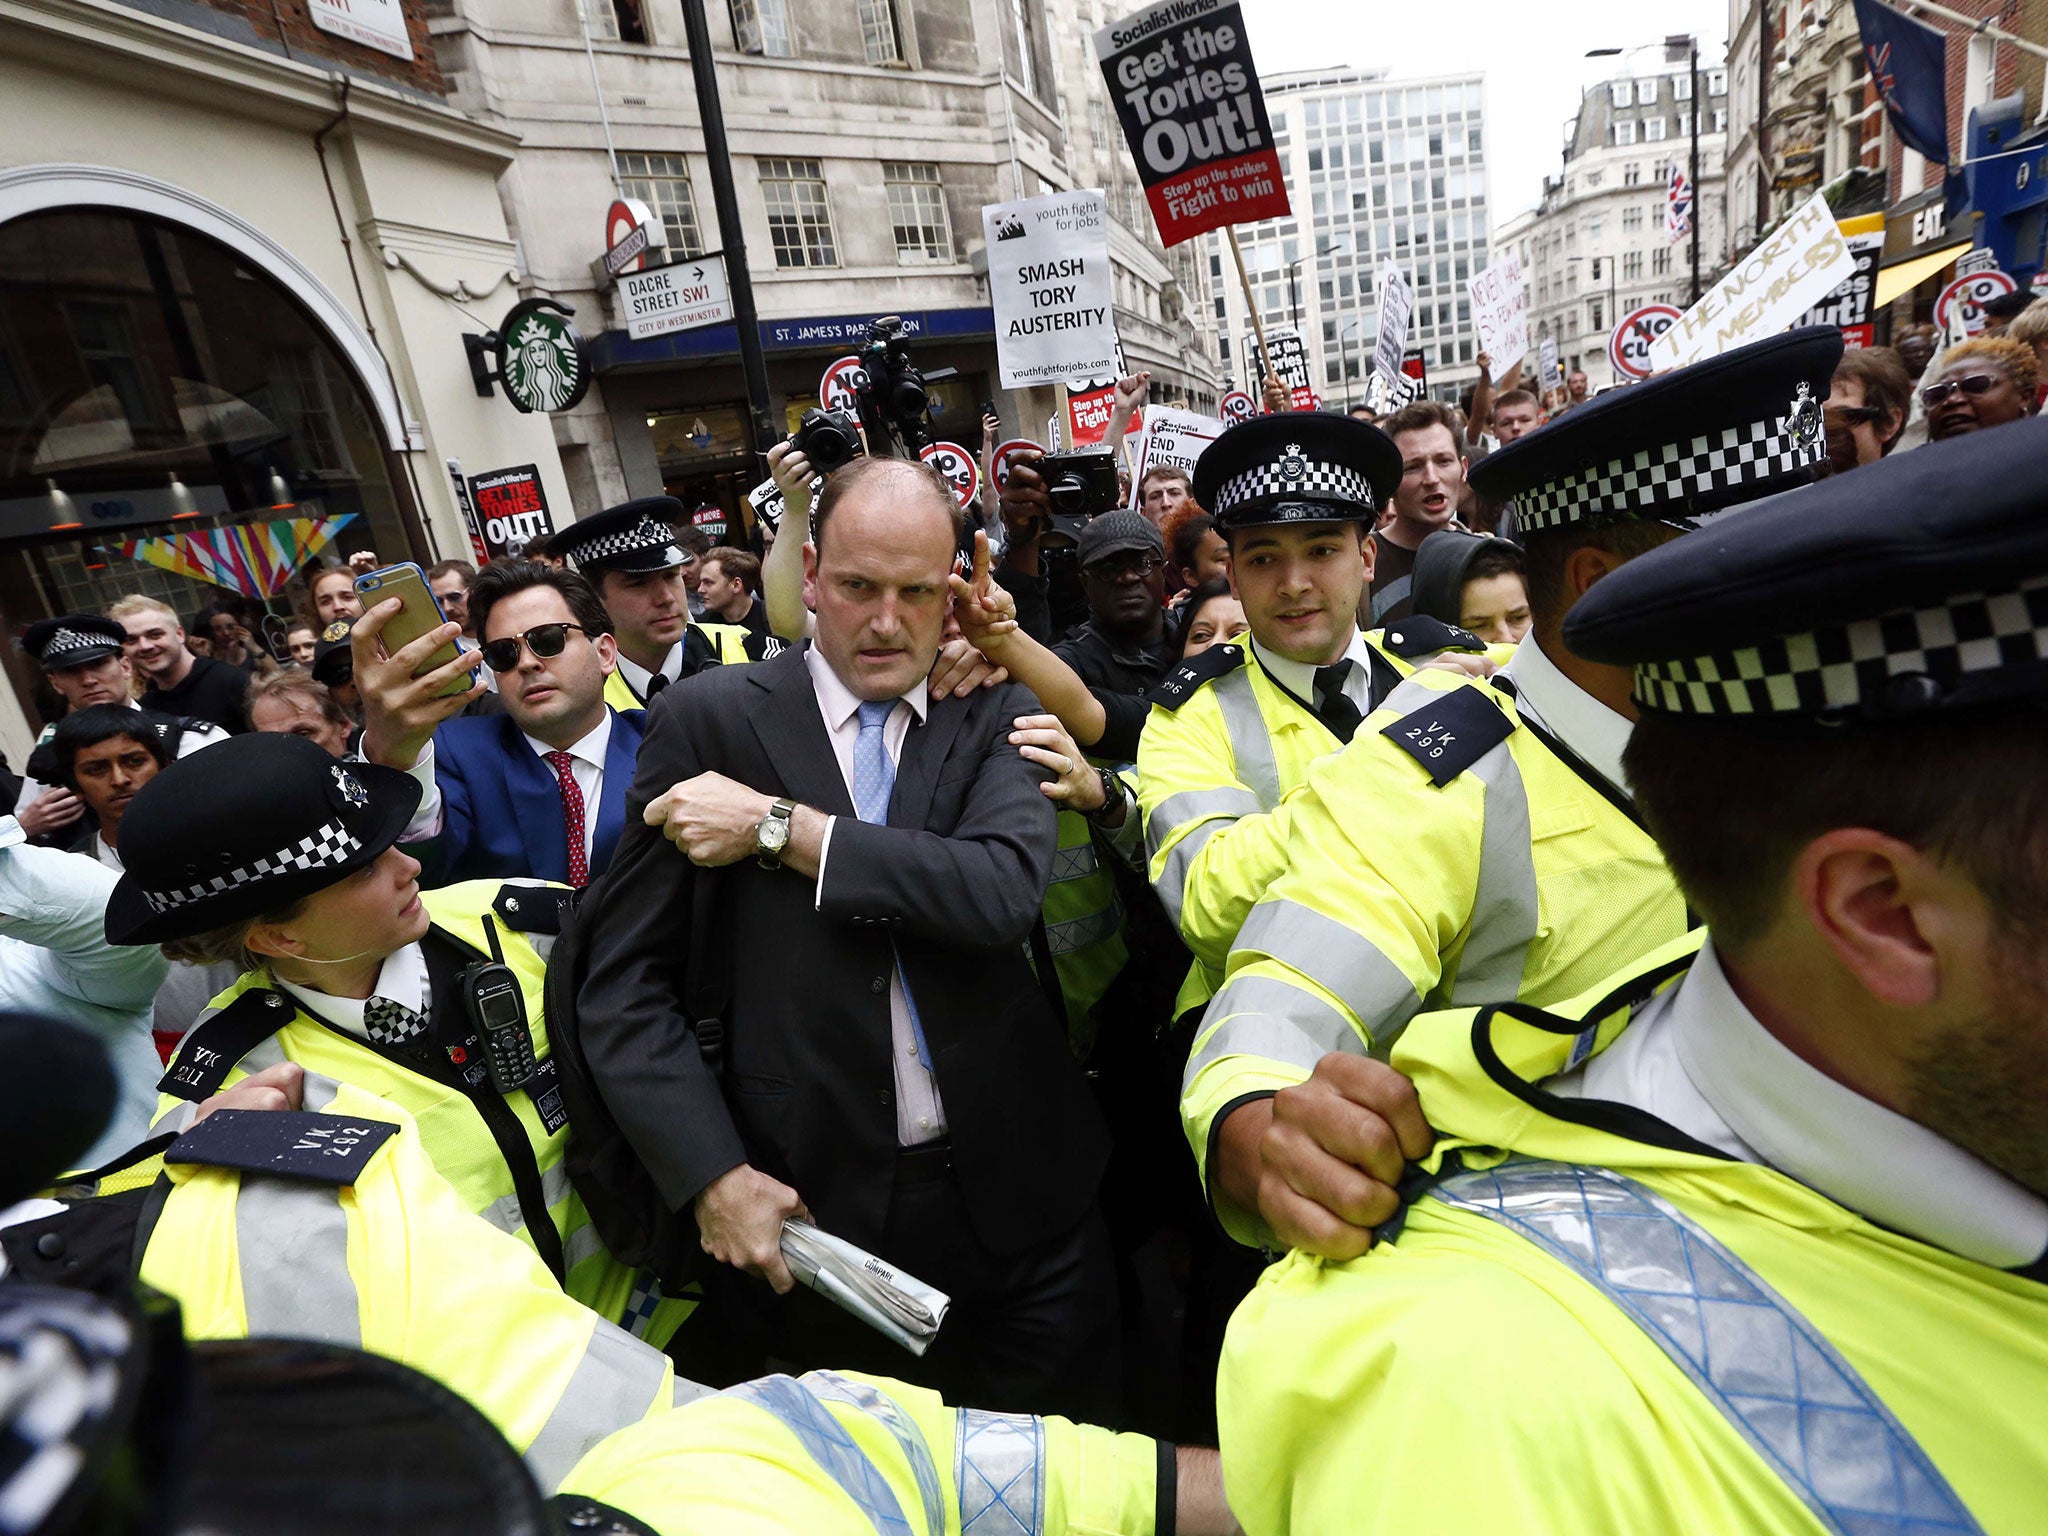 Police officers assist UKIP MP Douglas Carswell outside St James's Park underground station during an anti-austerity demonstration in London